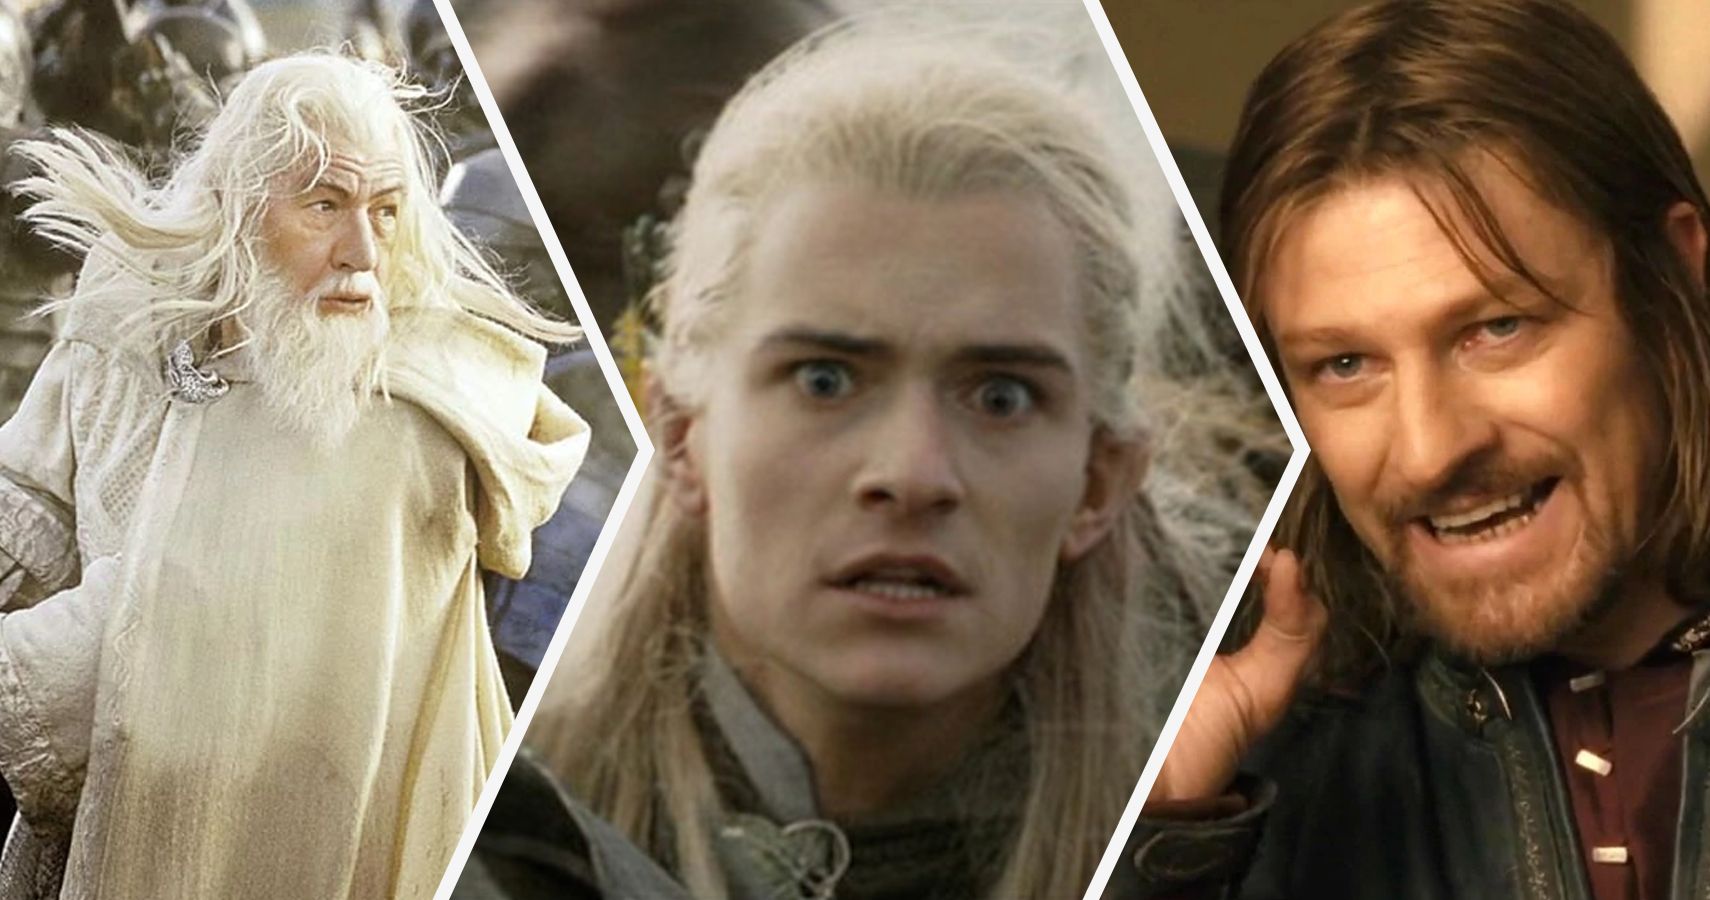 The Members Of The Fellowship Of The Ring Ranked From Weakest To Strongest